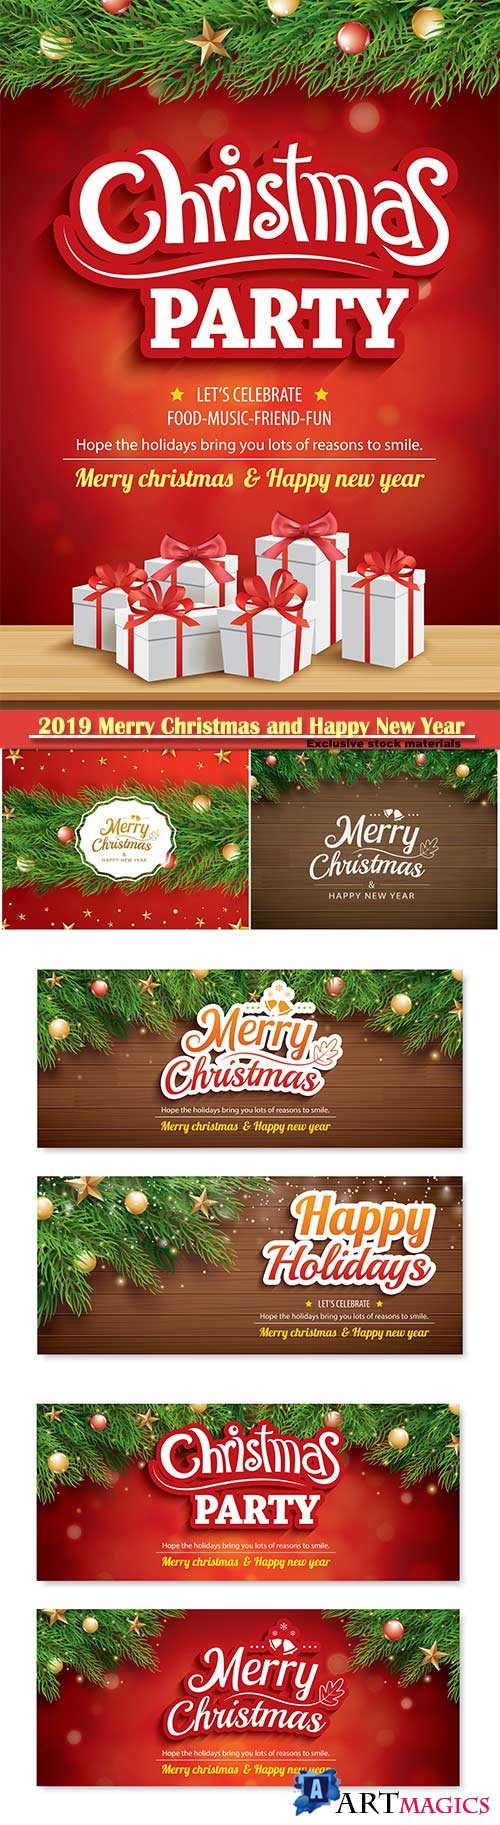 2019 Merry Christmas and Happy New Year vector design # 13